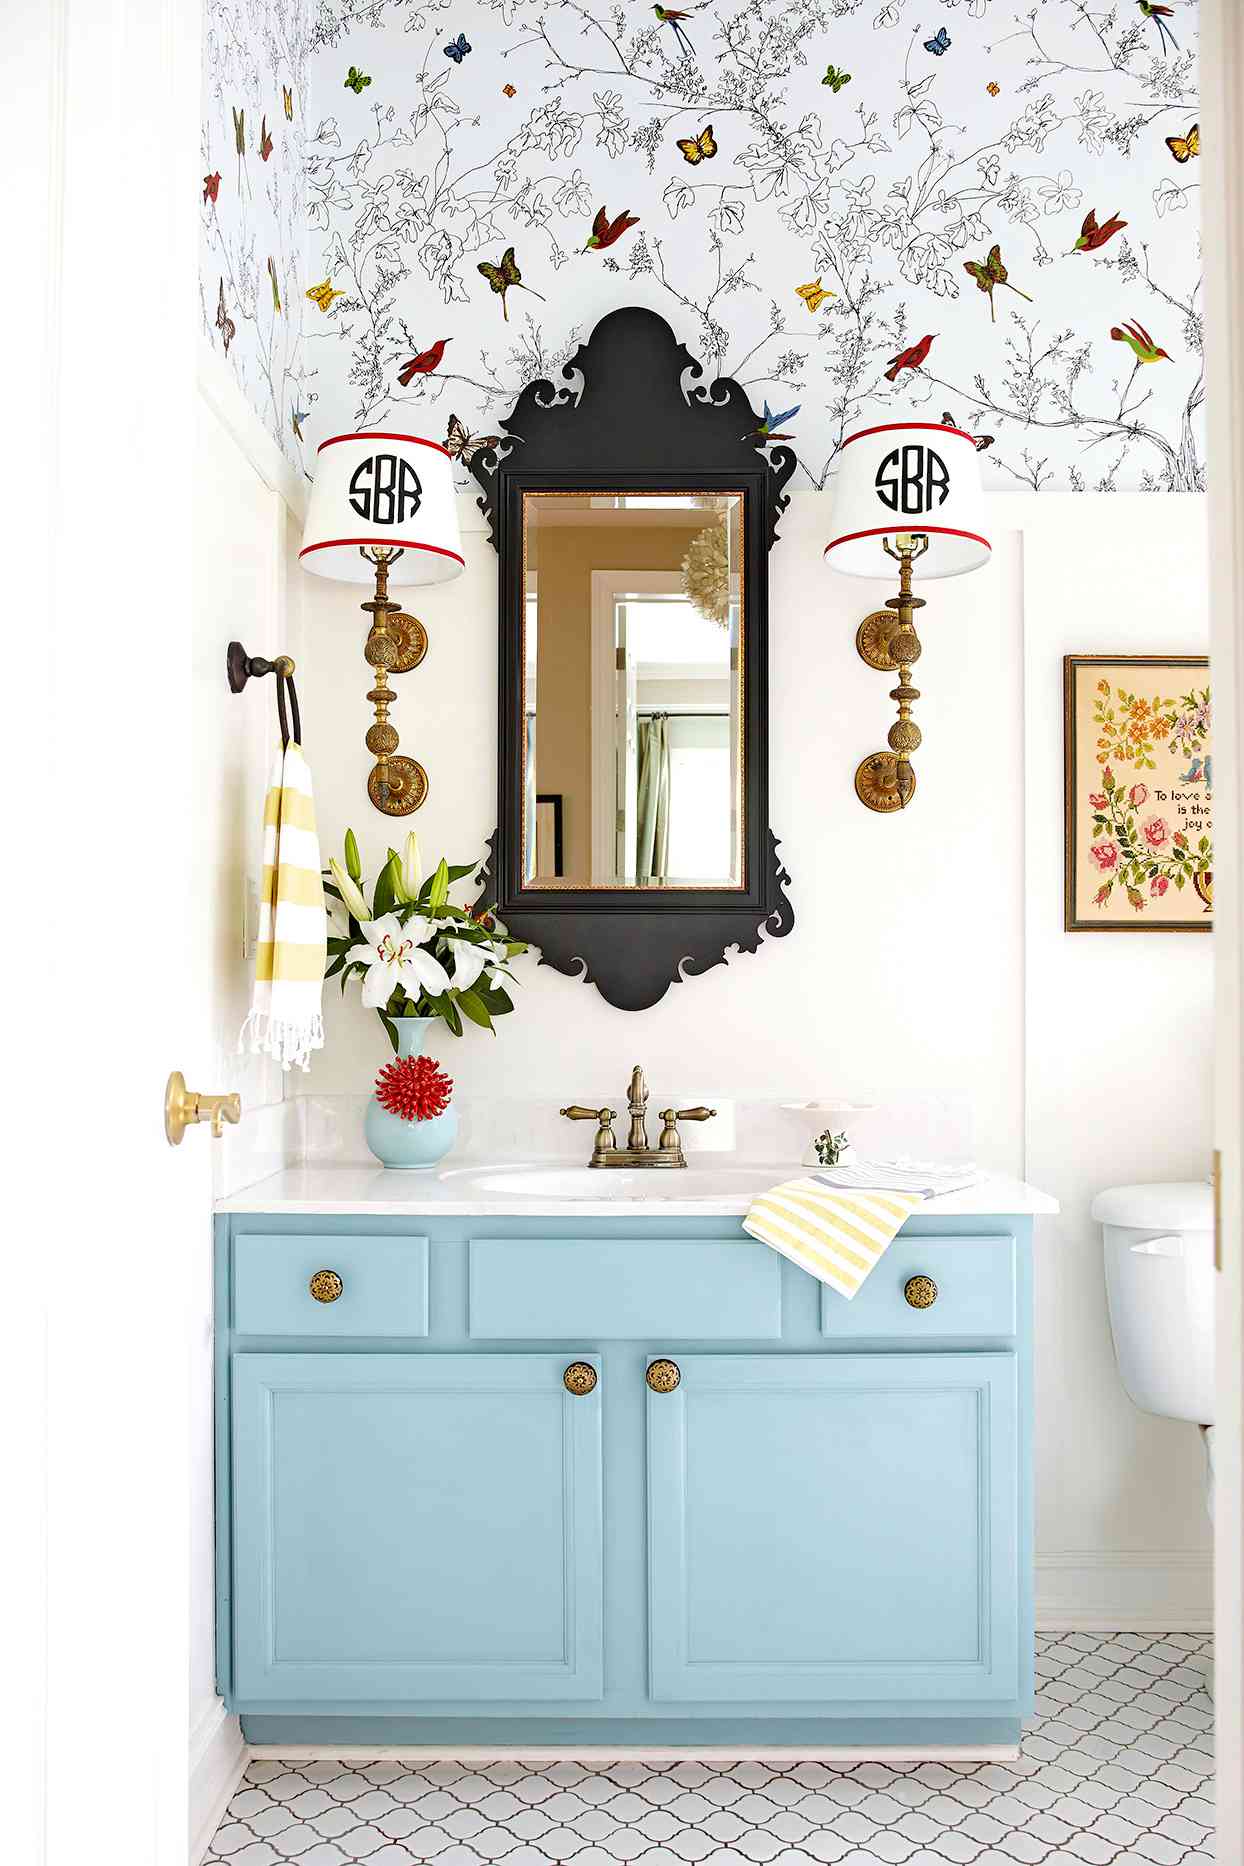 13 Before And After Vanity Makeovers, Colored Bathroom Vanity Ideas